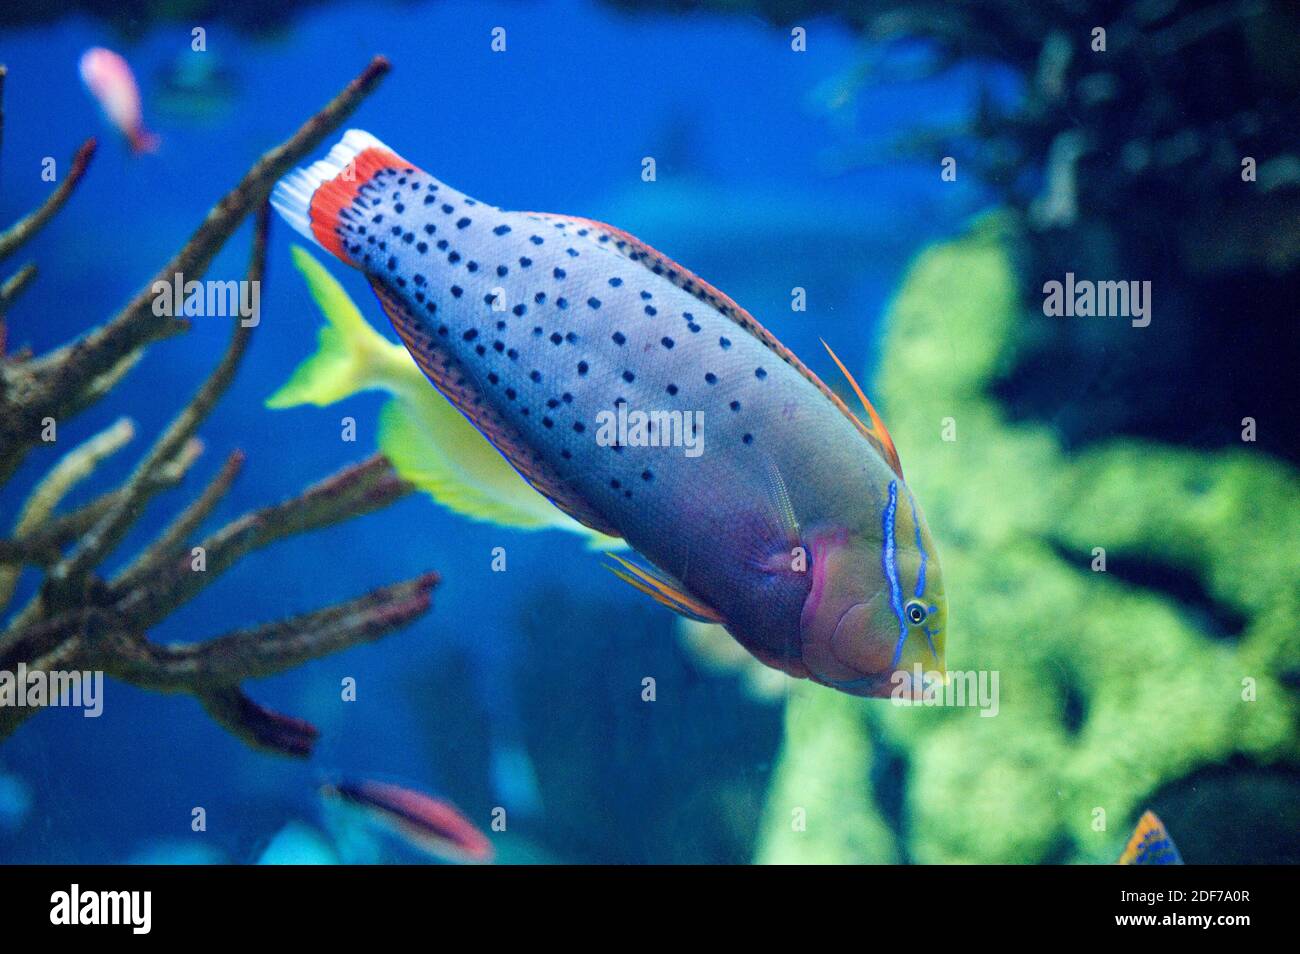 Queen coris or Formosa wrasse (Coris formosa) is a marine fish native to tropical Indian Ocean. Adult specimen. Stock Photo